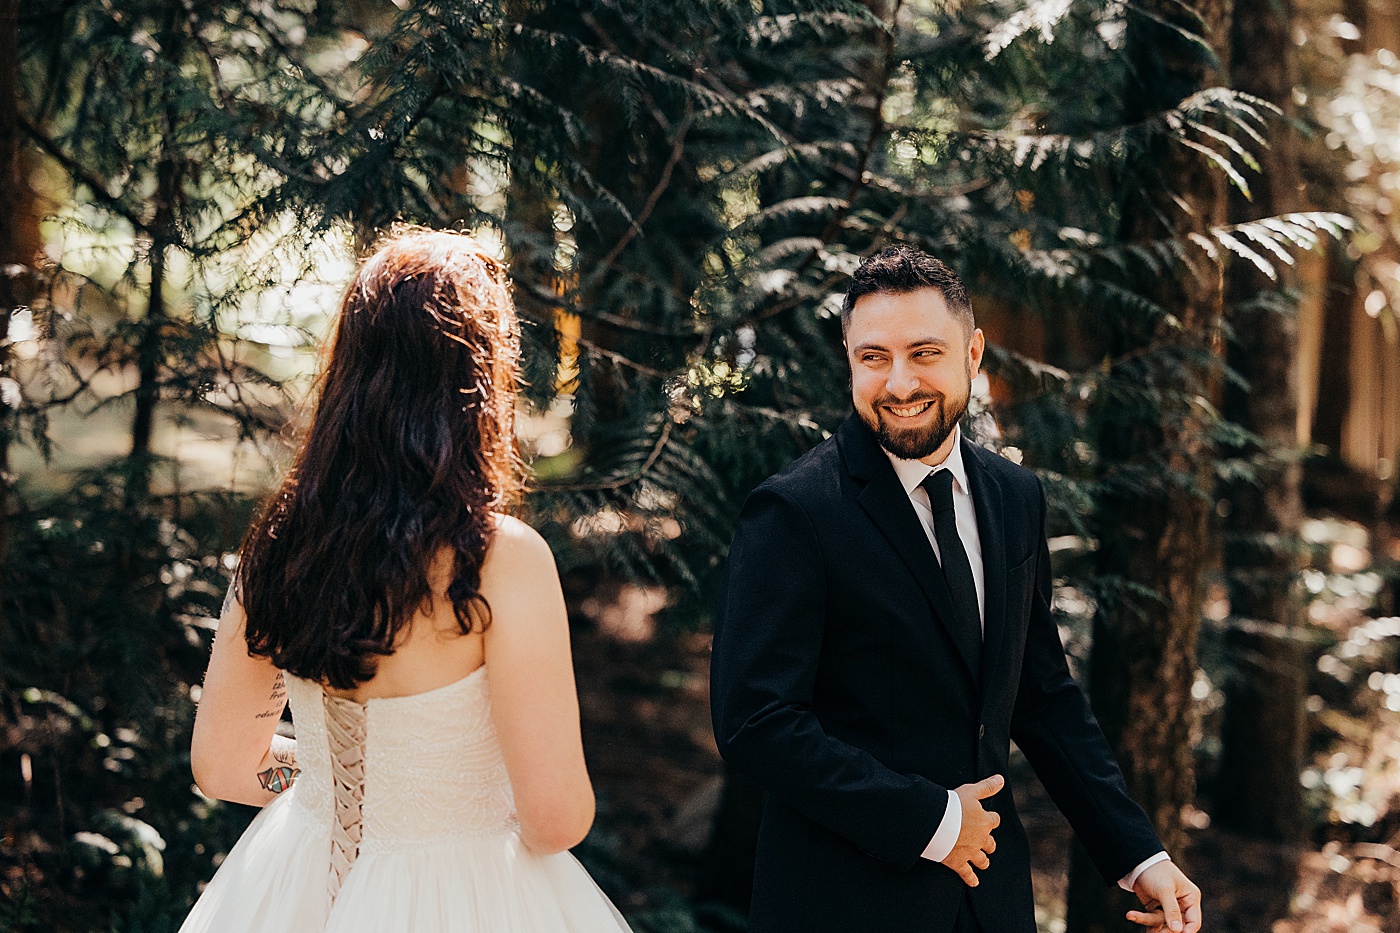 First look between bride and groom | Photo by Megan Montalvo Photography